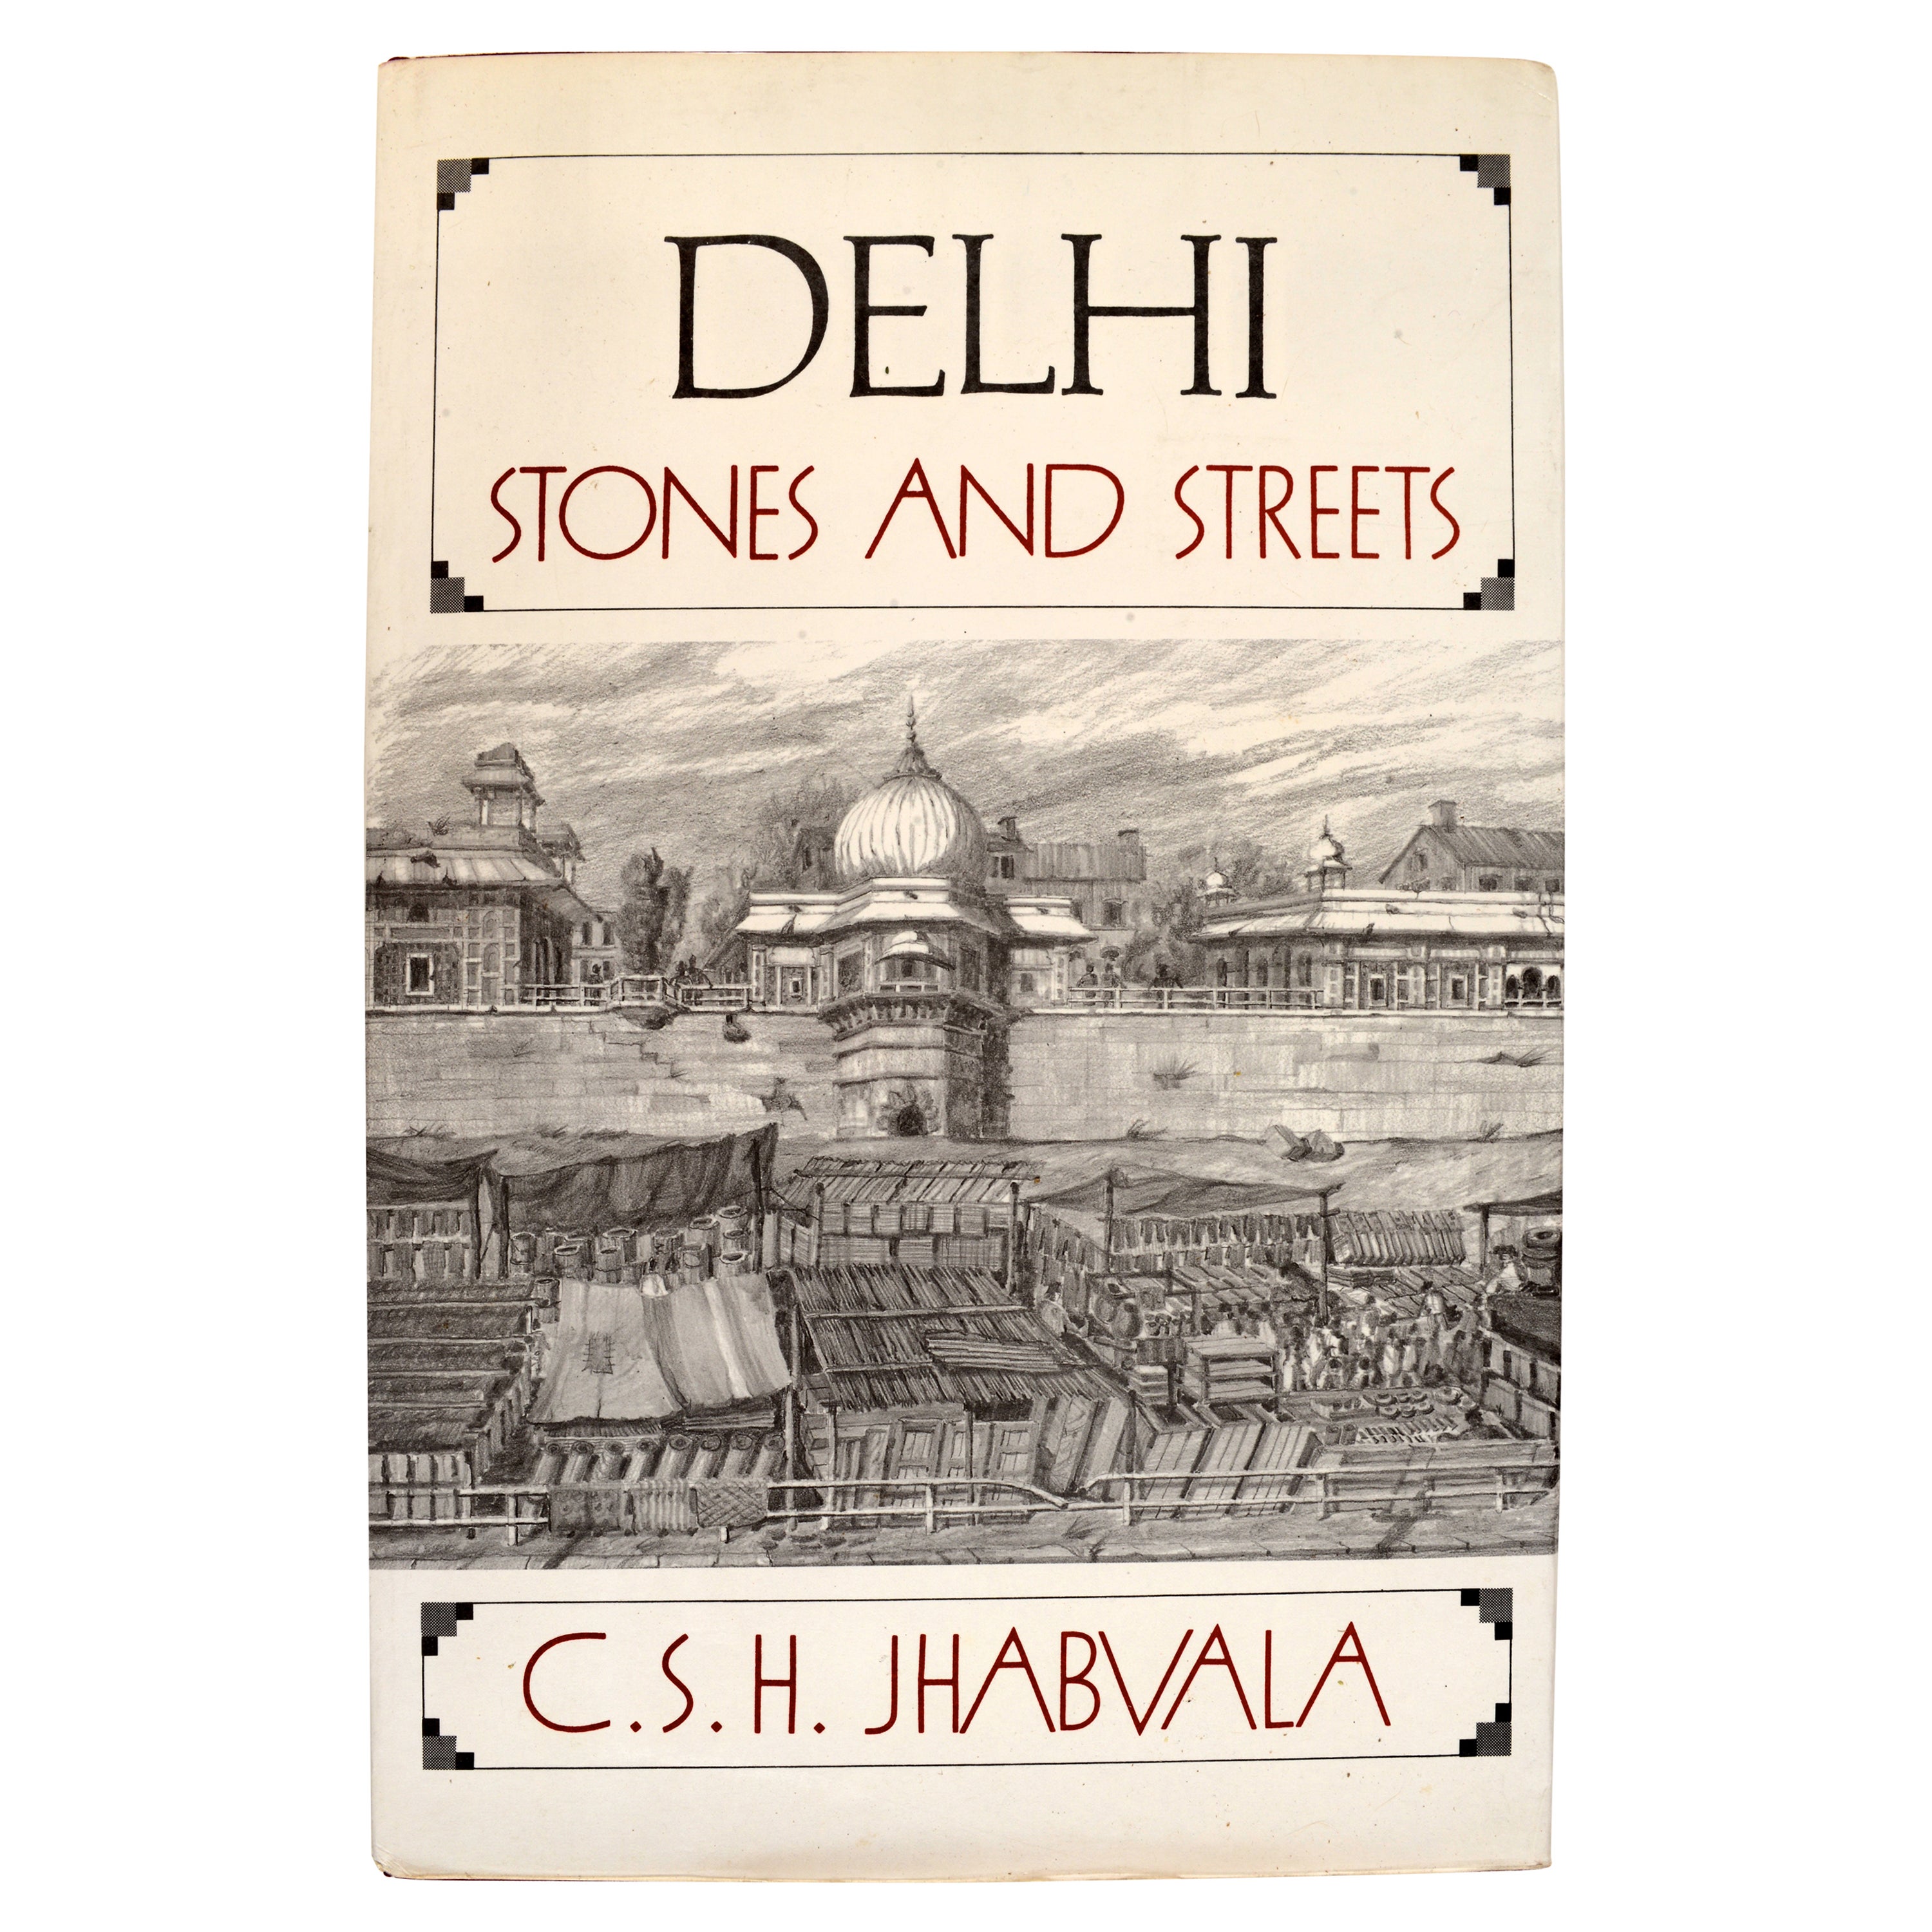 Delhi Stones and Streets by C.S.H. Jhabvala, Signed by the Author